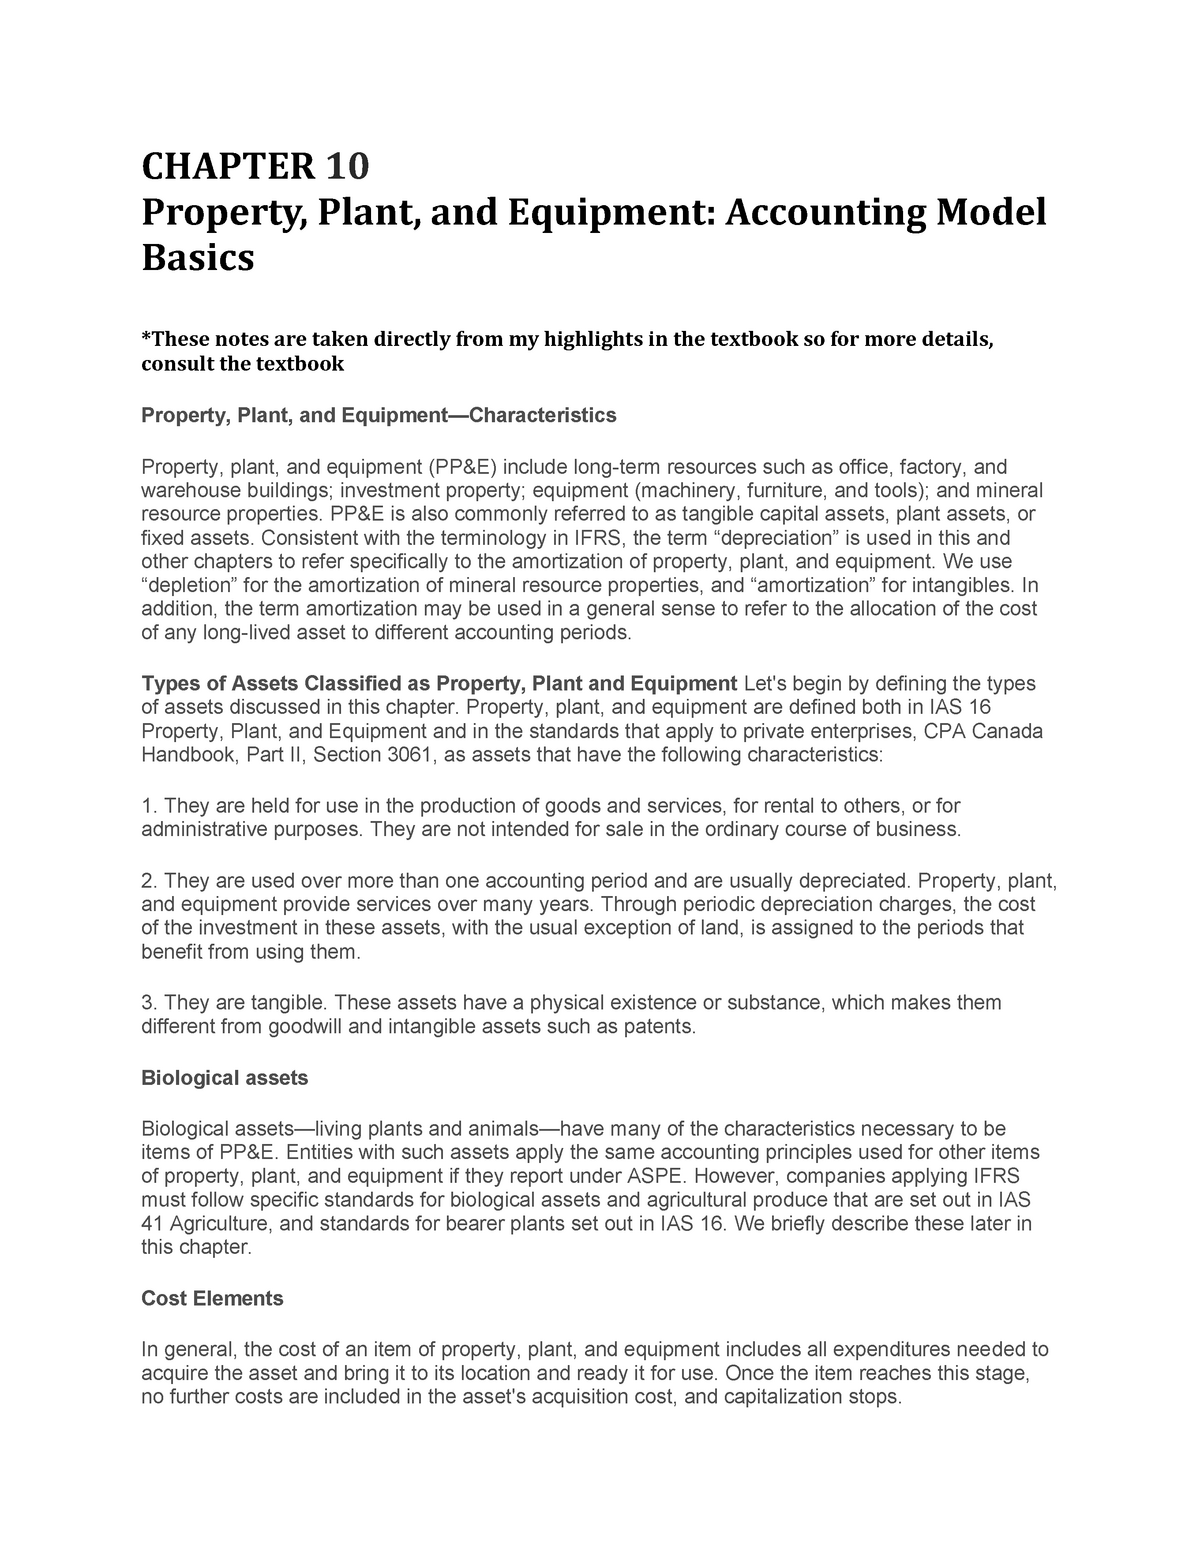 Property plant and equipment accounting model basics of investing trader spread betting